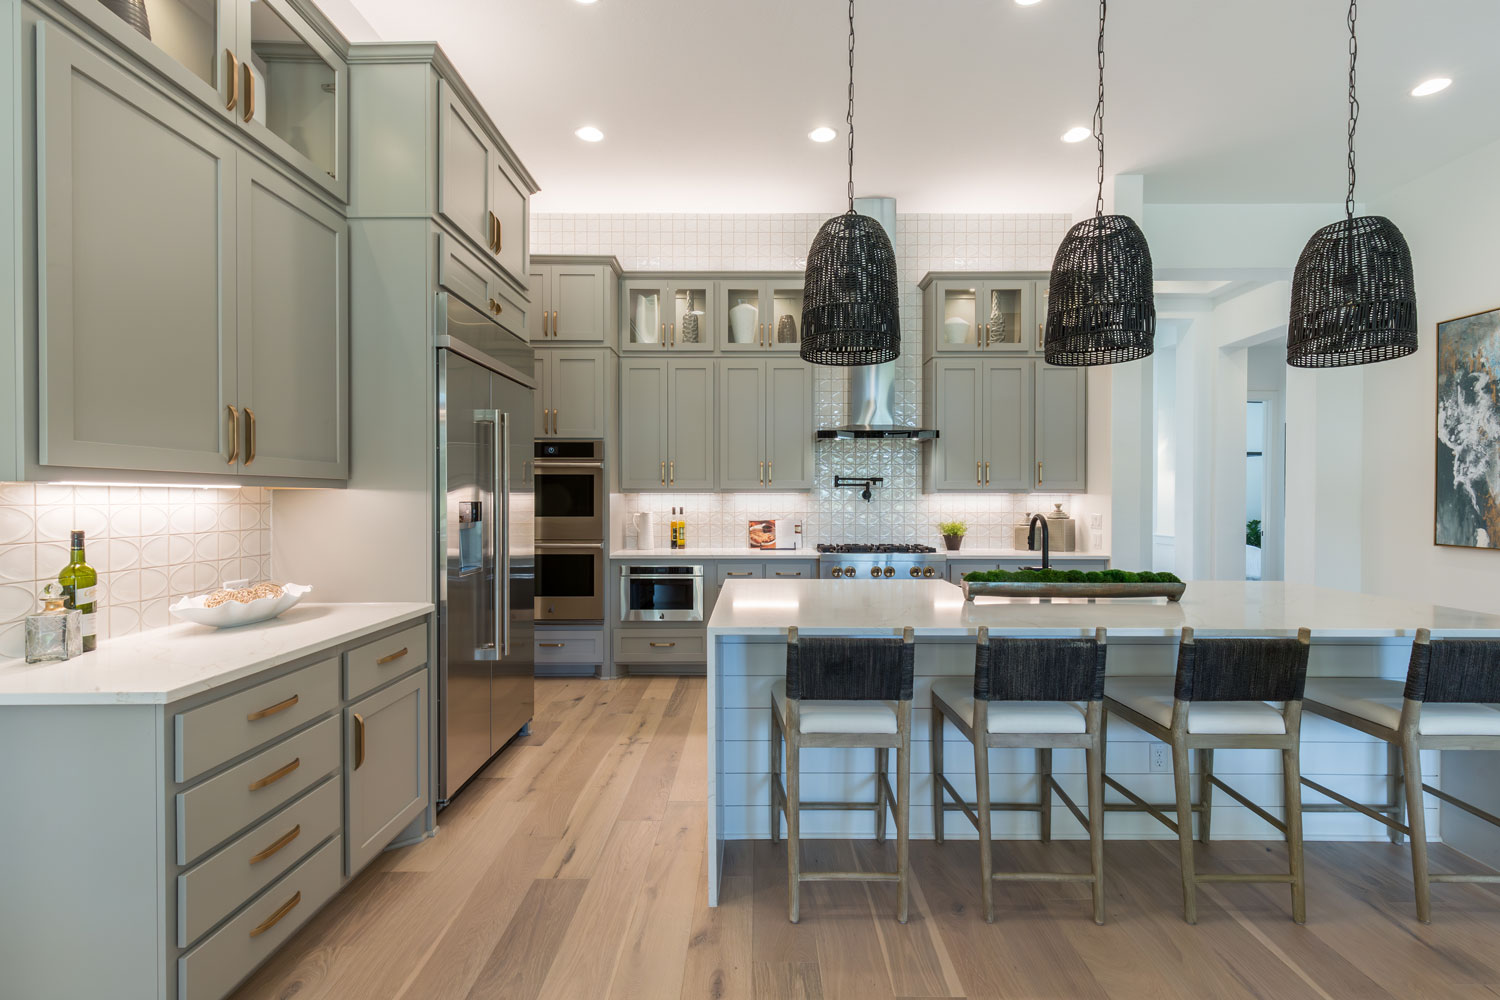 Kitchen with gray-green painted cabinets and Shaker style cabinet doors with OE4, IE2, flat panel